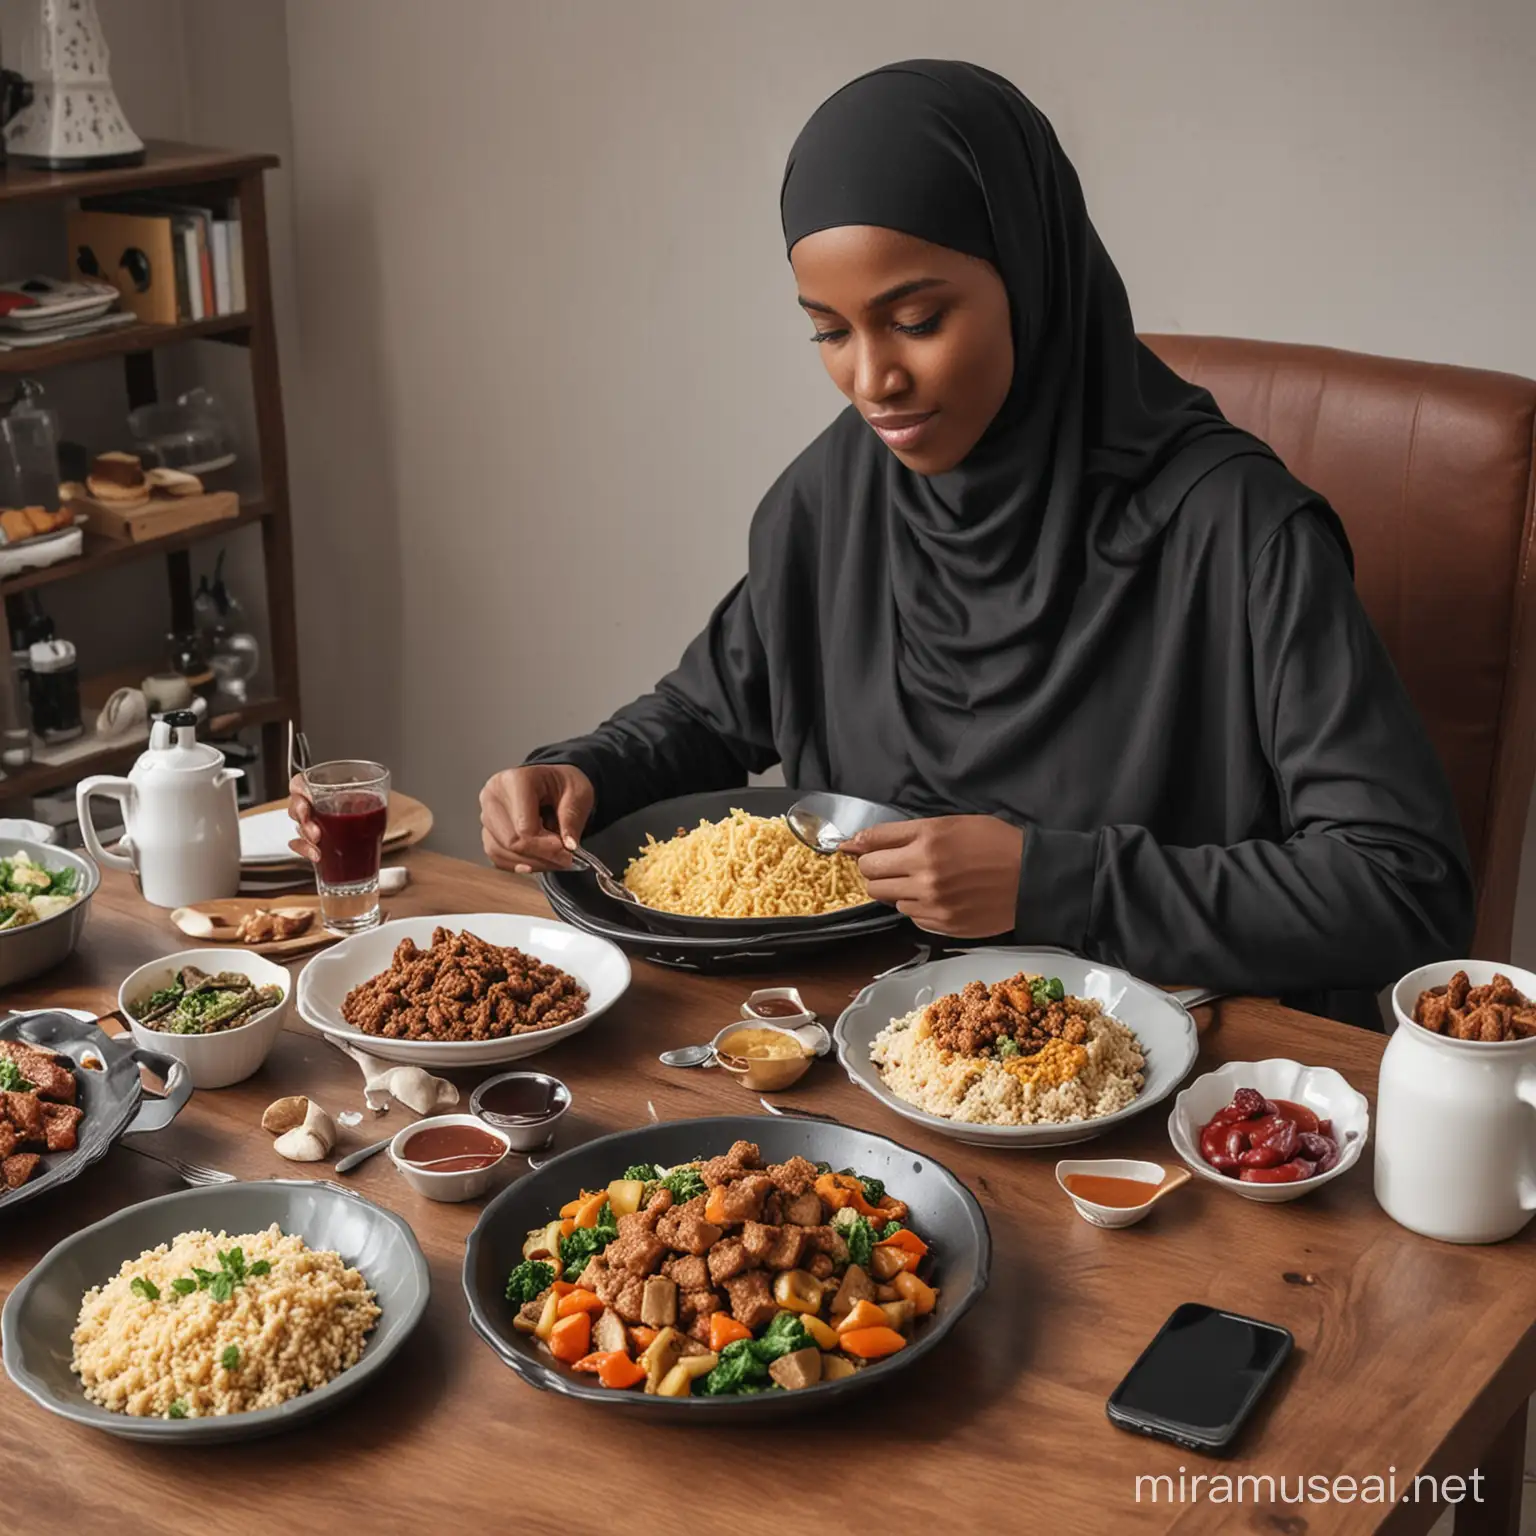 Black Muslim Enjoying a Meal with Technological Gadgets on the Table